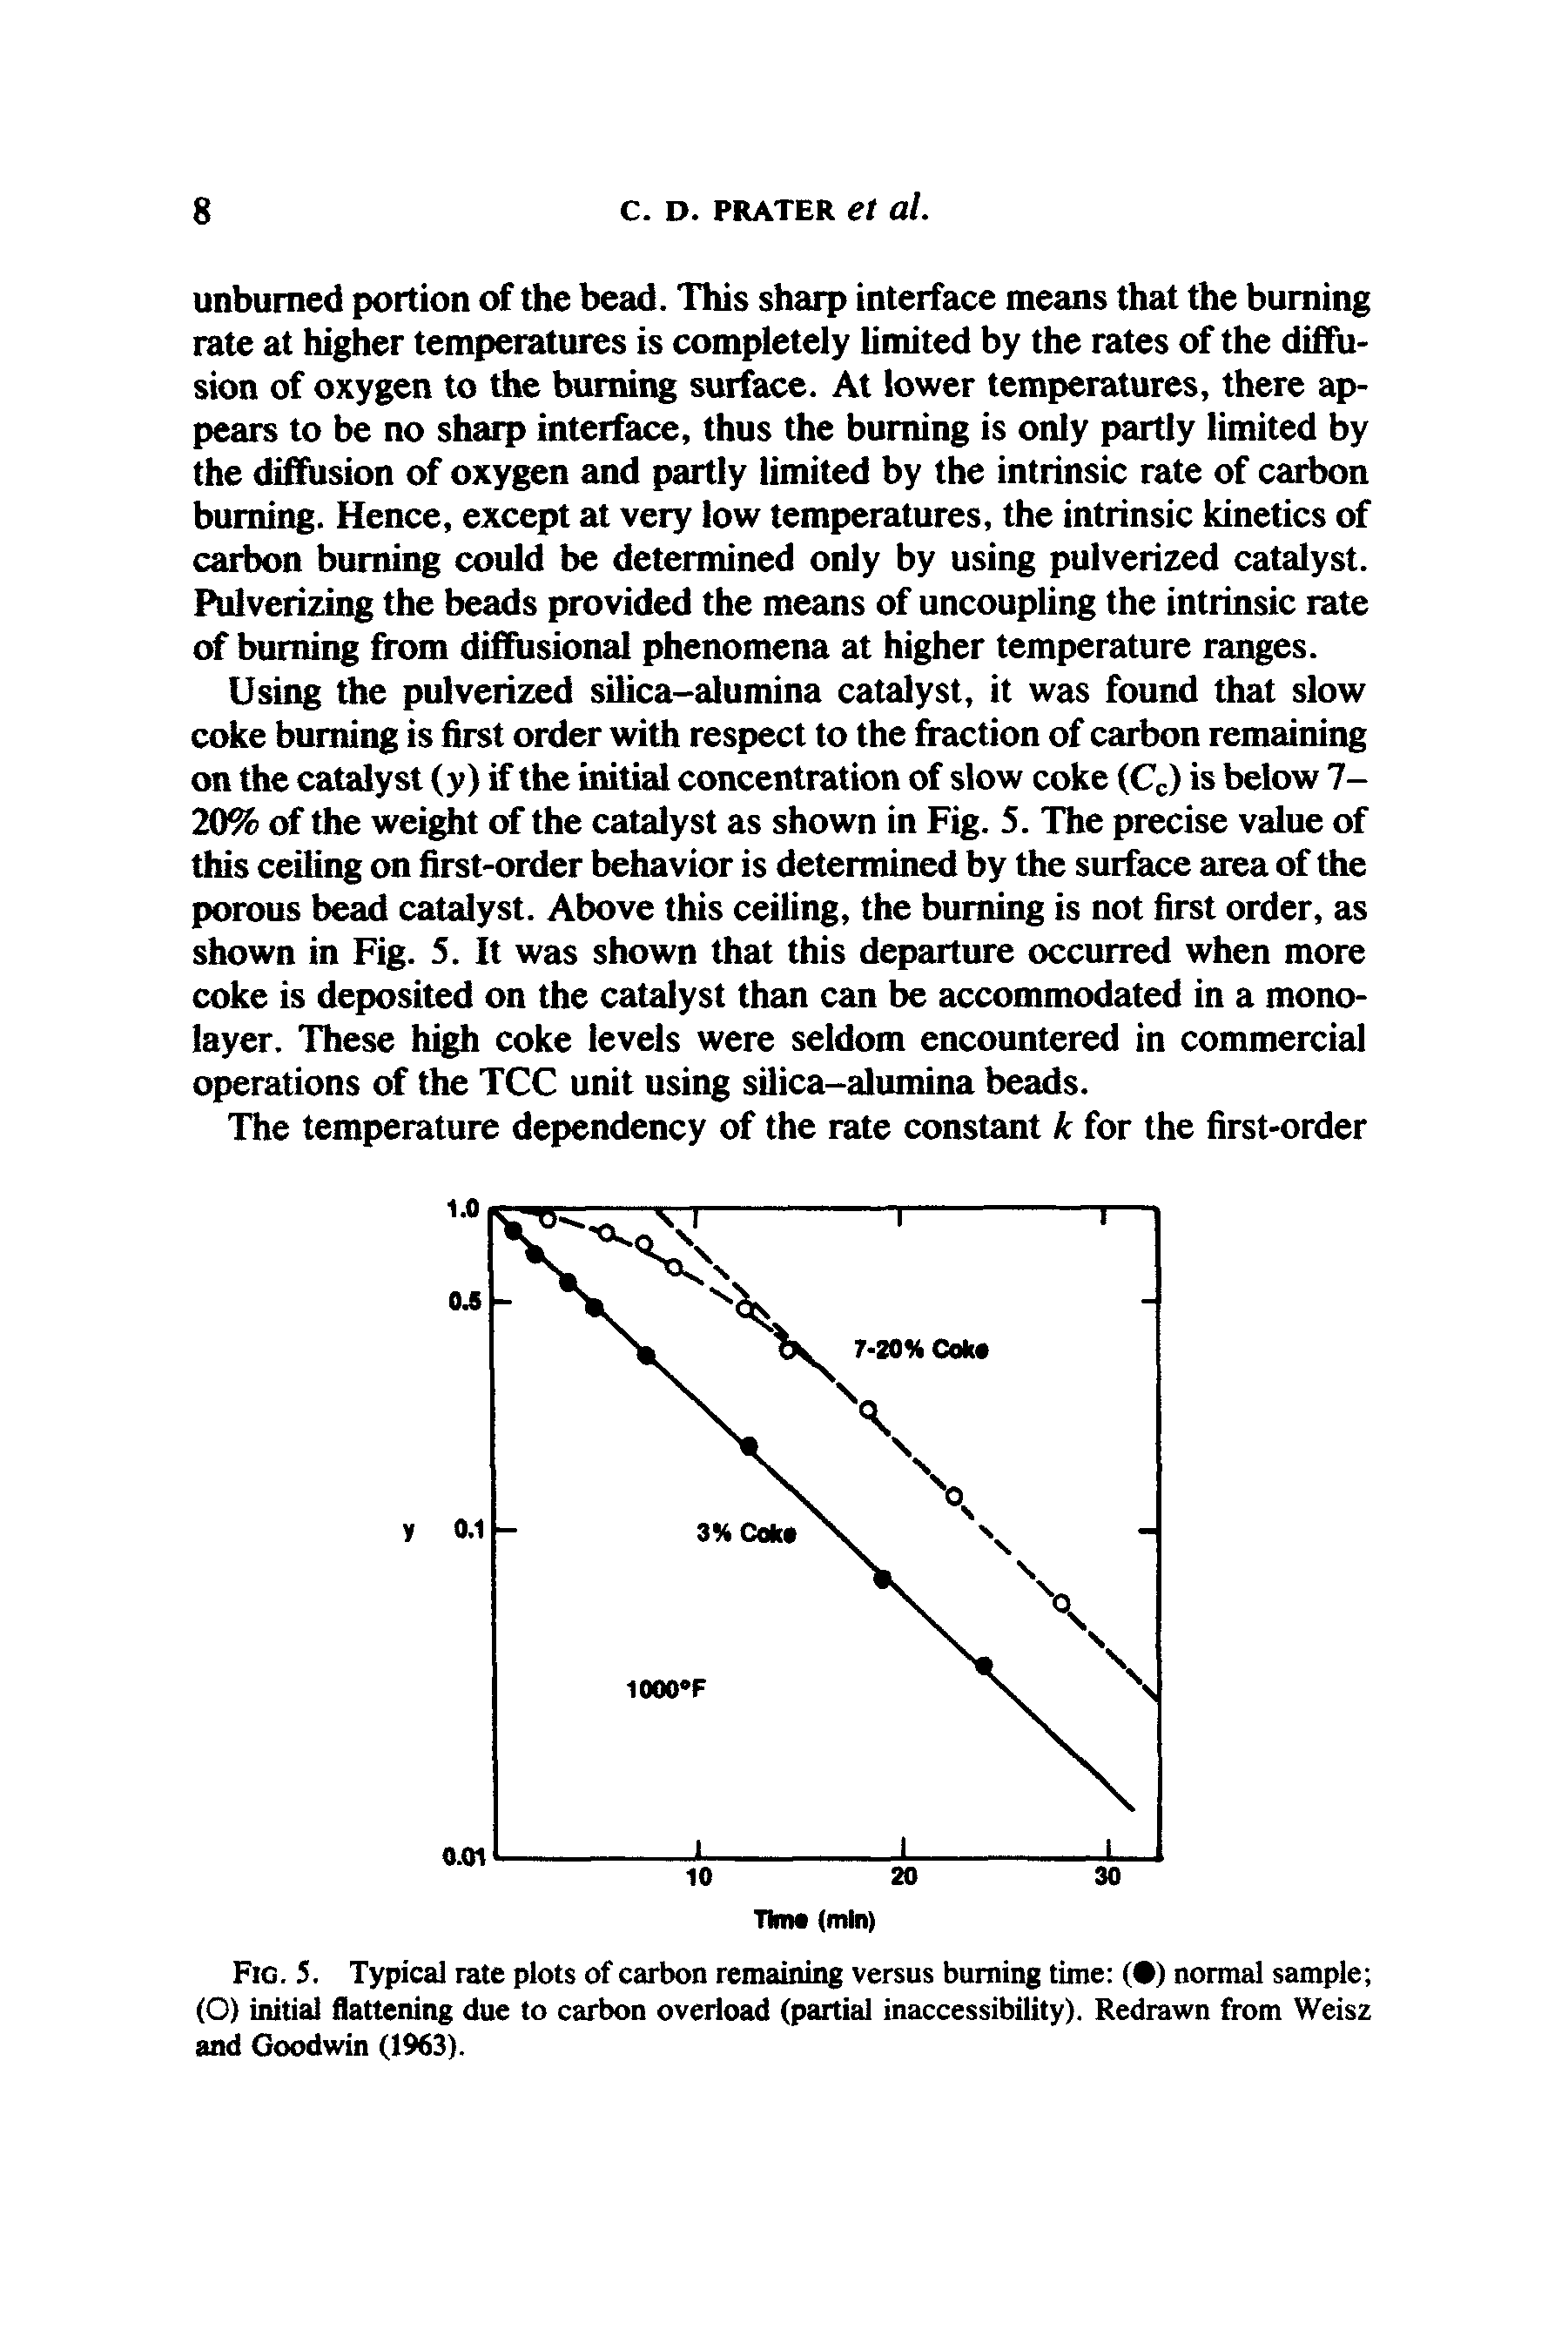 Fig. 5. Typical rate plots of carbon remaining versus burning time ( ) normal sample (O) initial flattening due to carbon overload (partial inaccessibility). Redrawn from Weisz and Goodwin (1963).